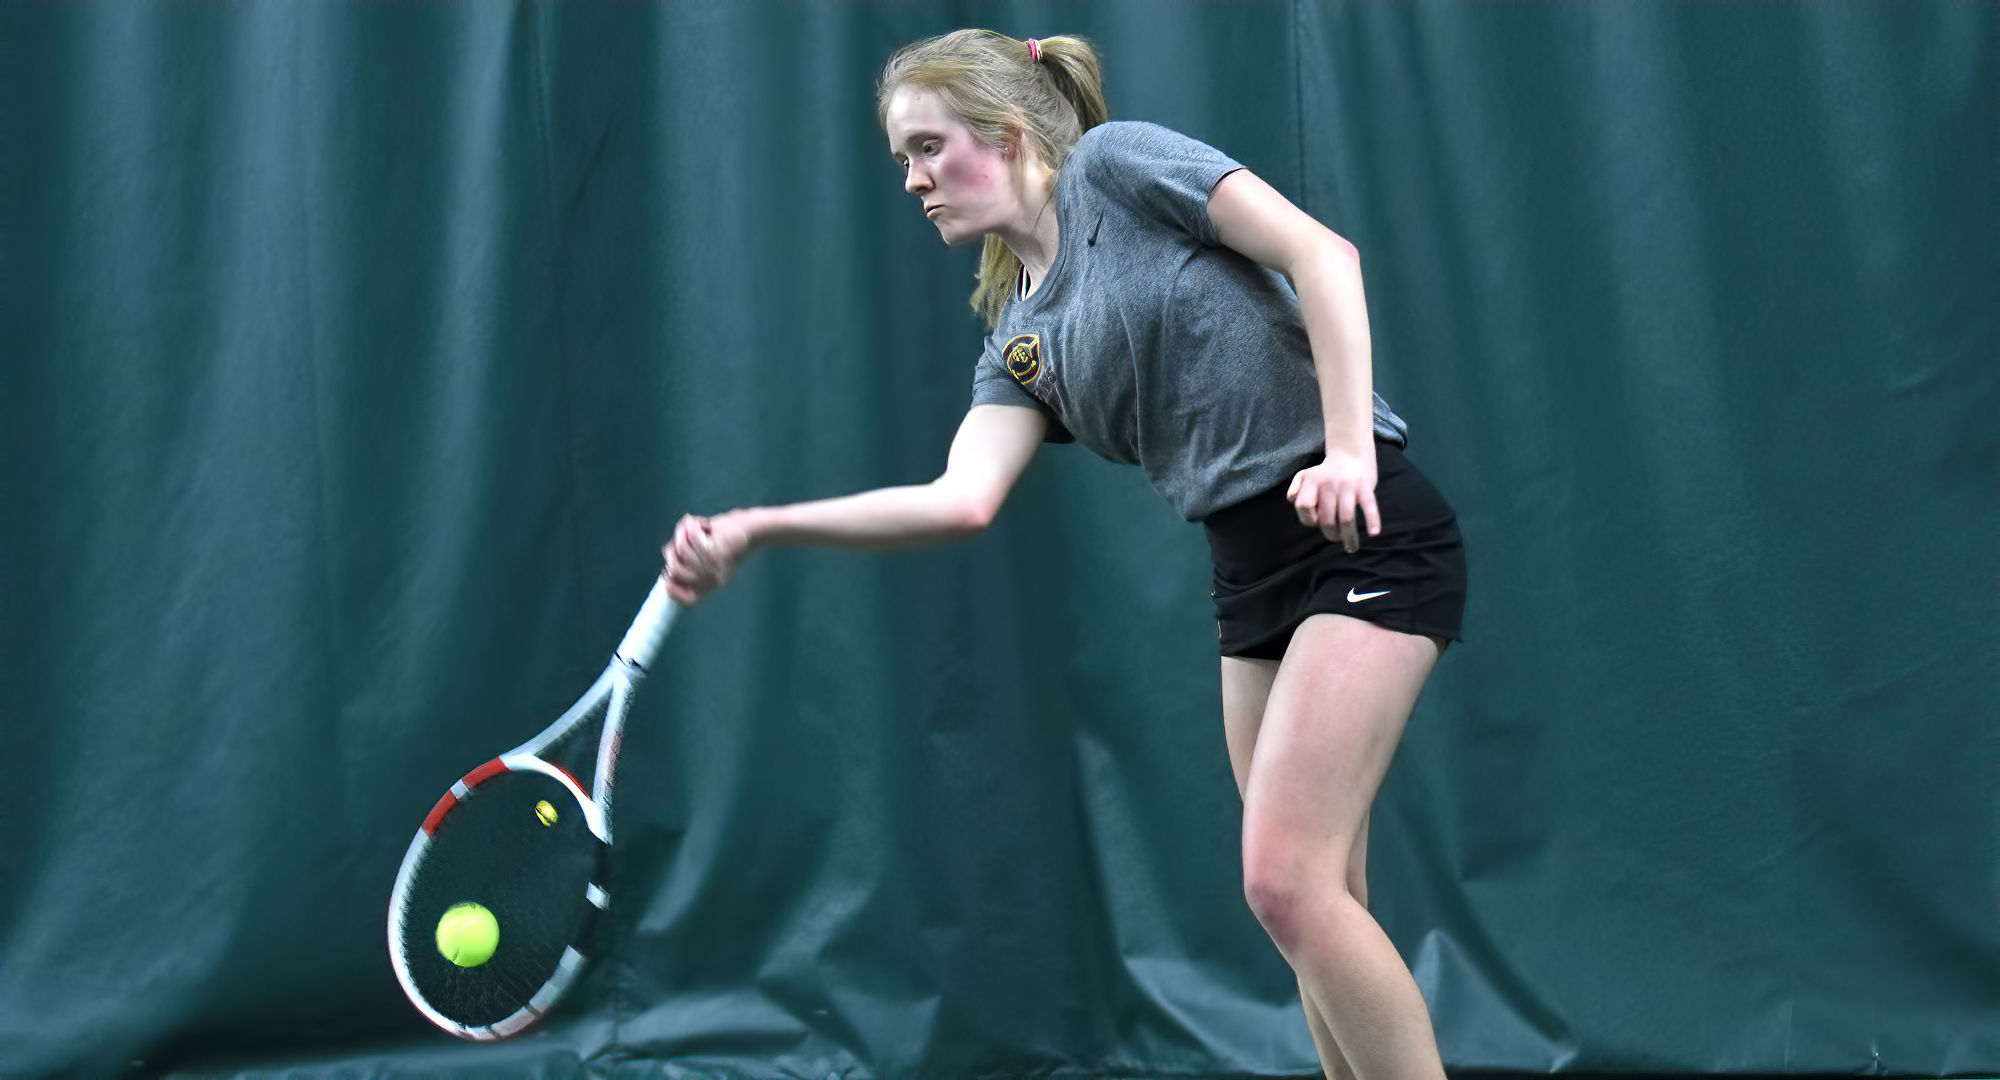 Sophomore Erin Borchard claimed the only team point for the Cobbers in their match at St. Catherine. She won 6-2, 6-4 at No.6 singles.